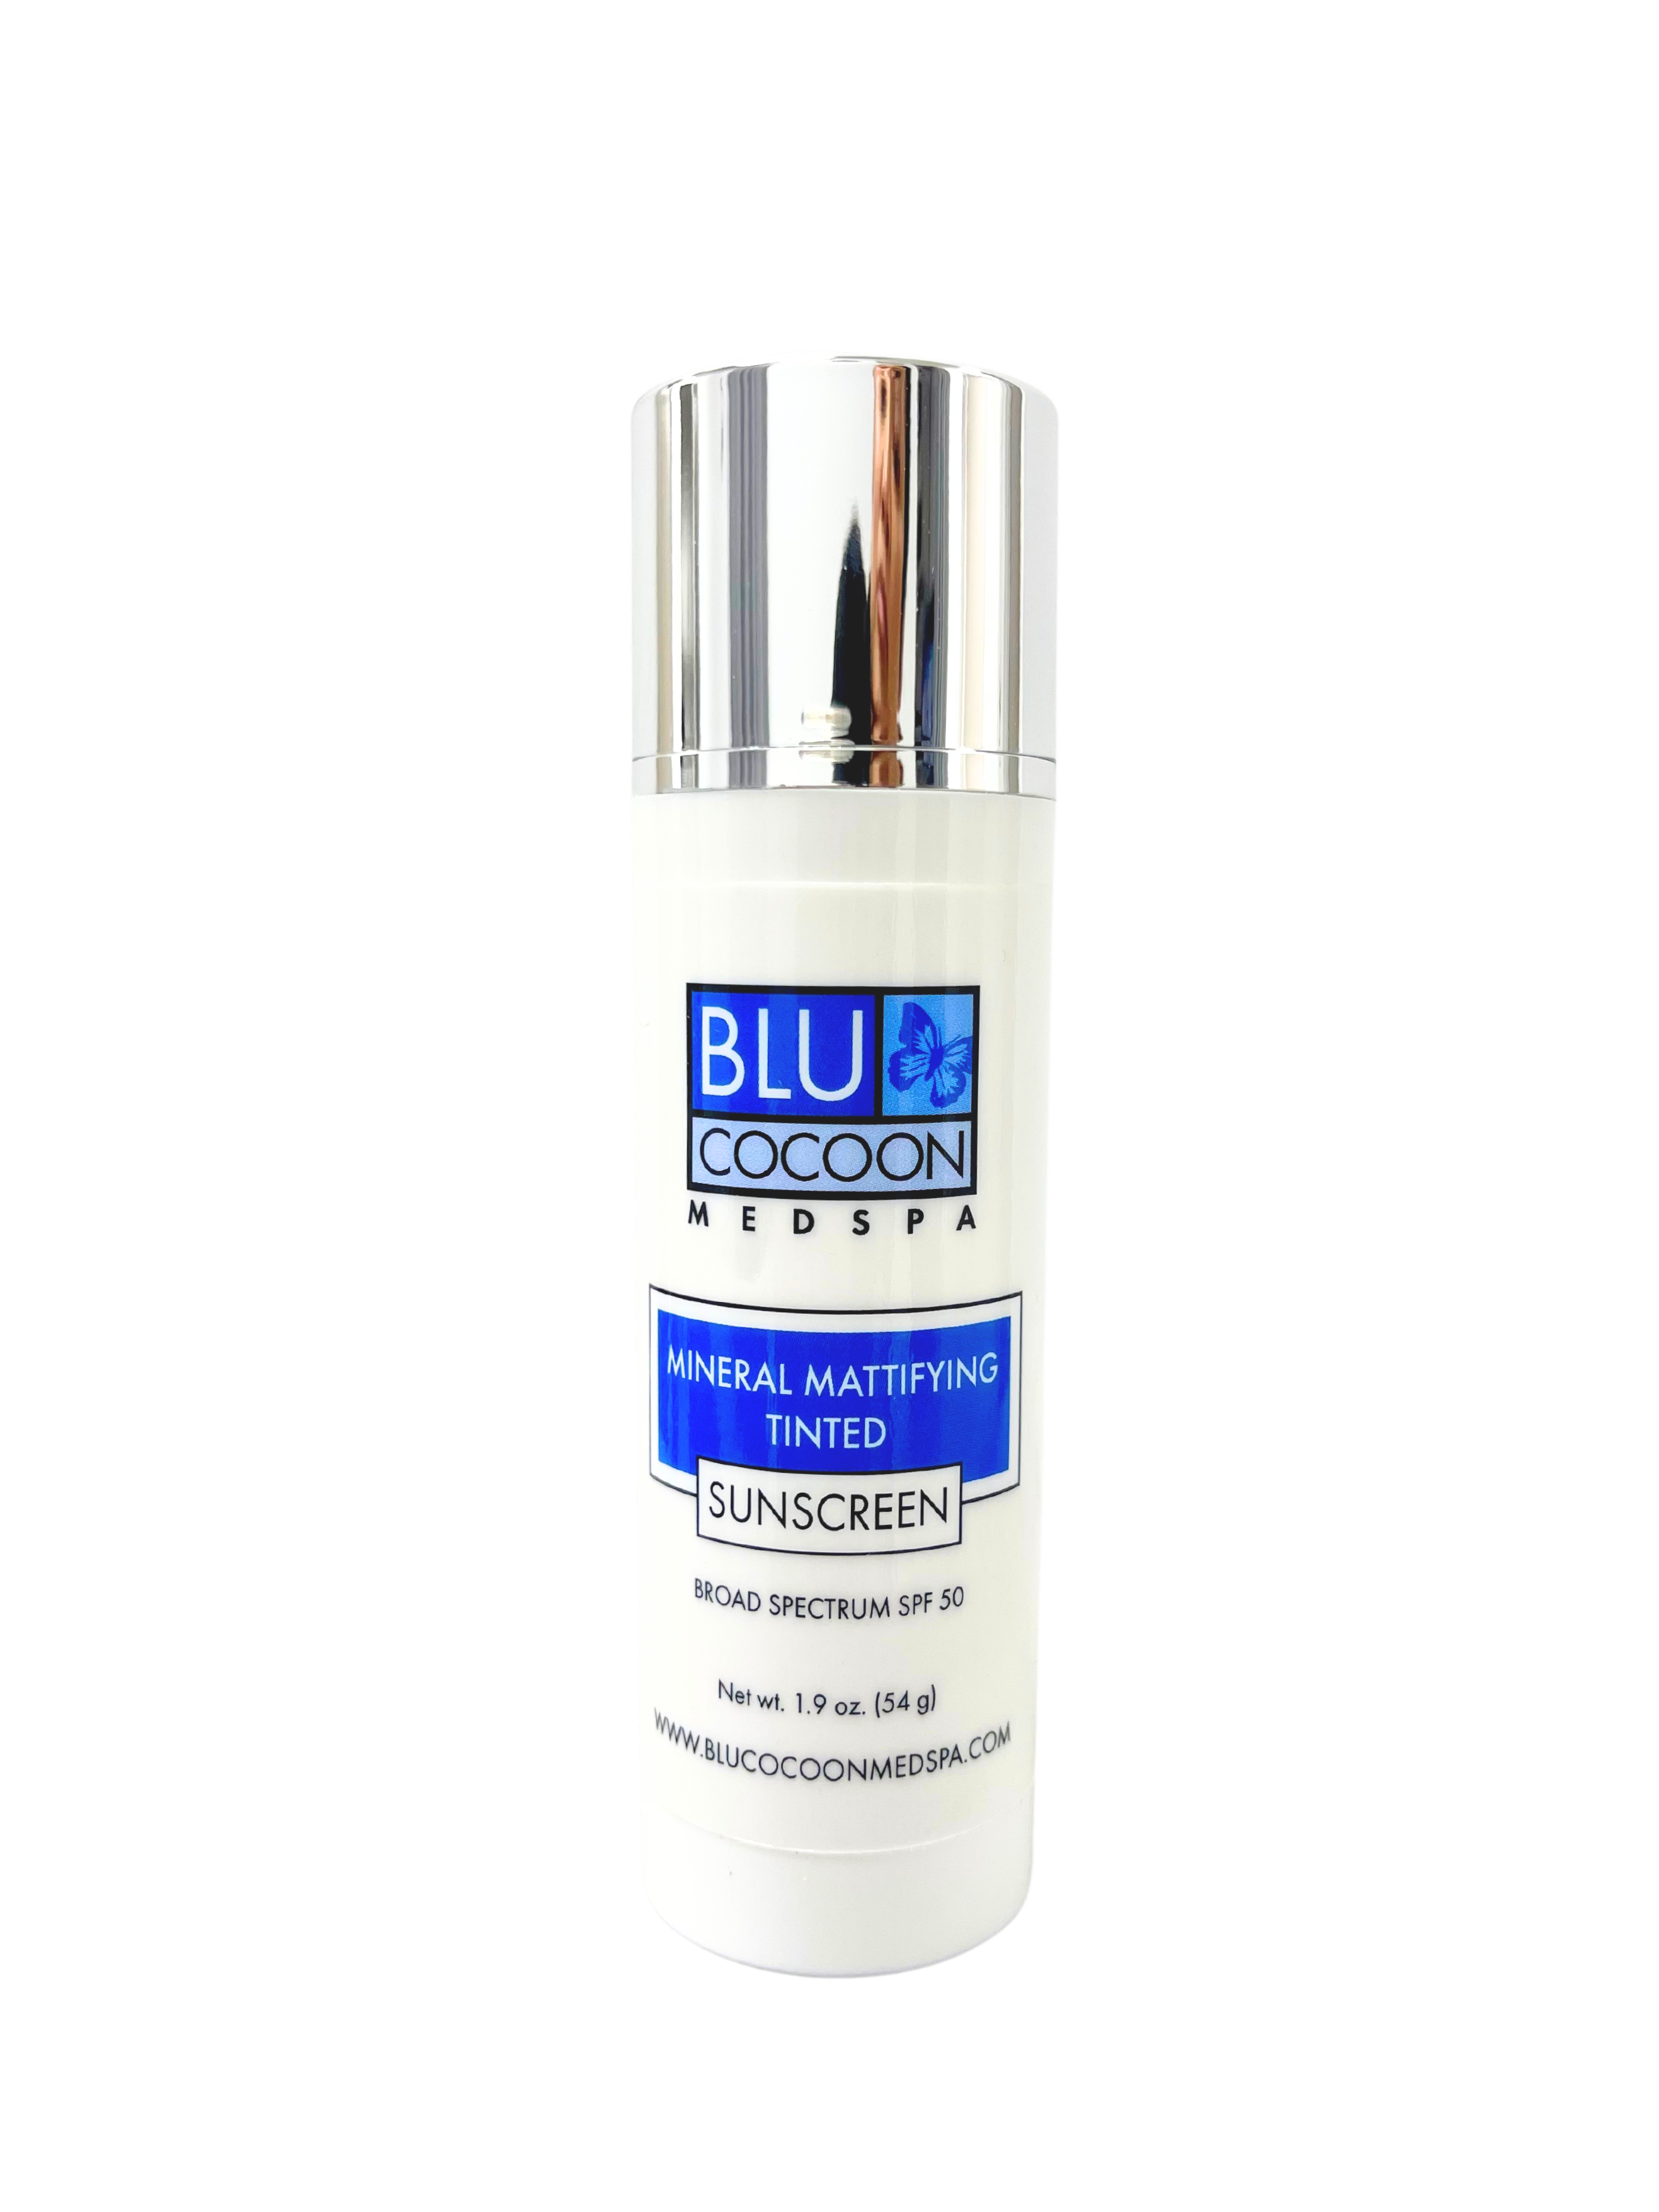 Mineral Mattifying Tinted Sunscreen SPF 50 by Blu Cocoon